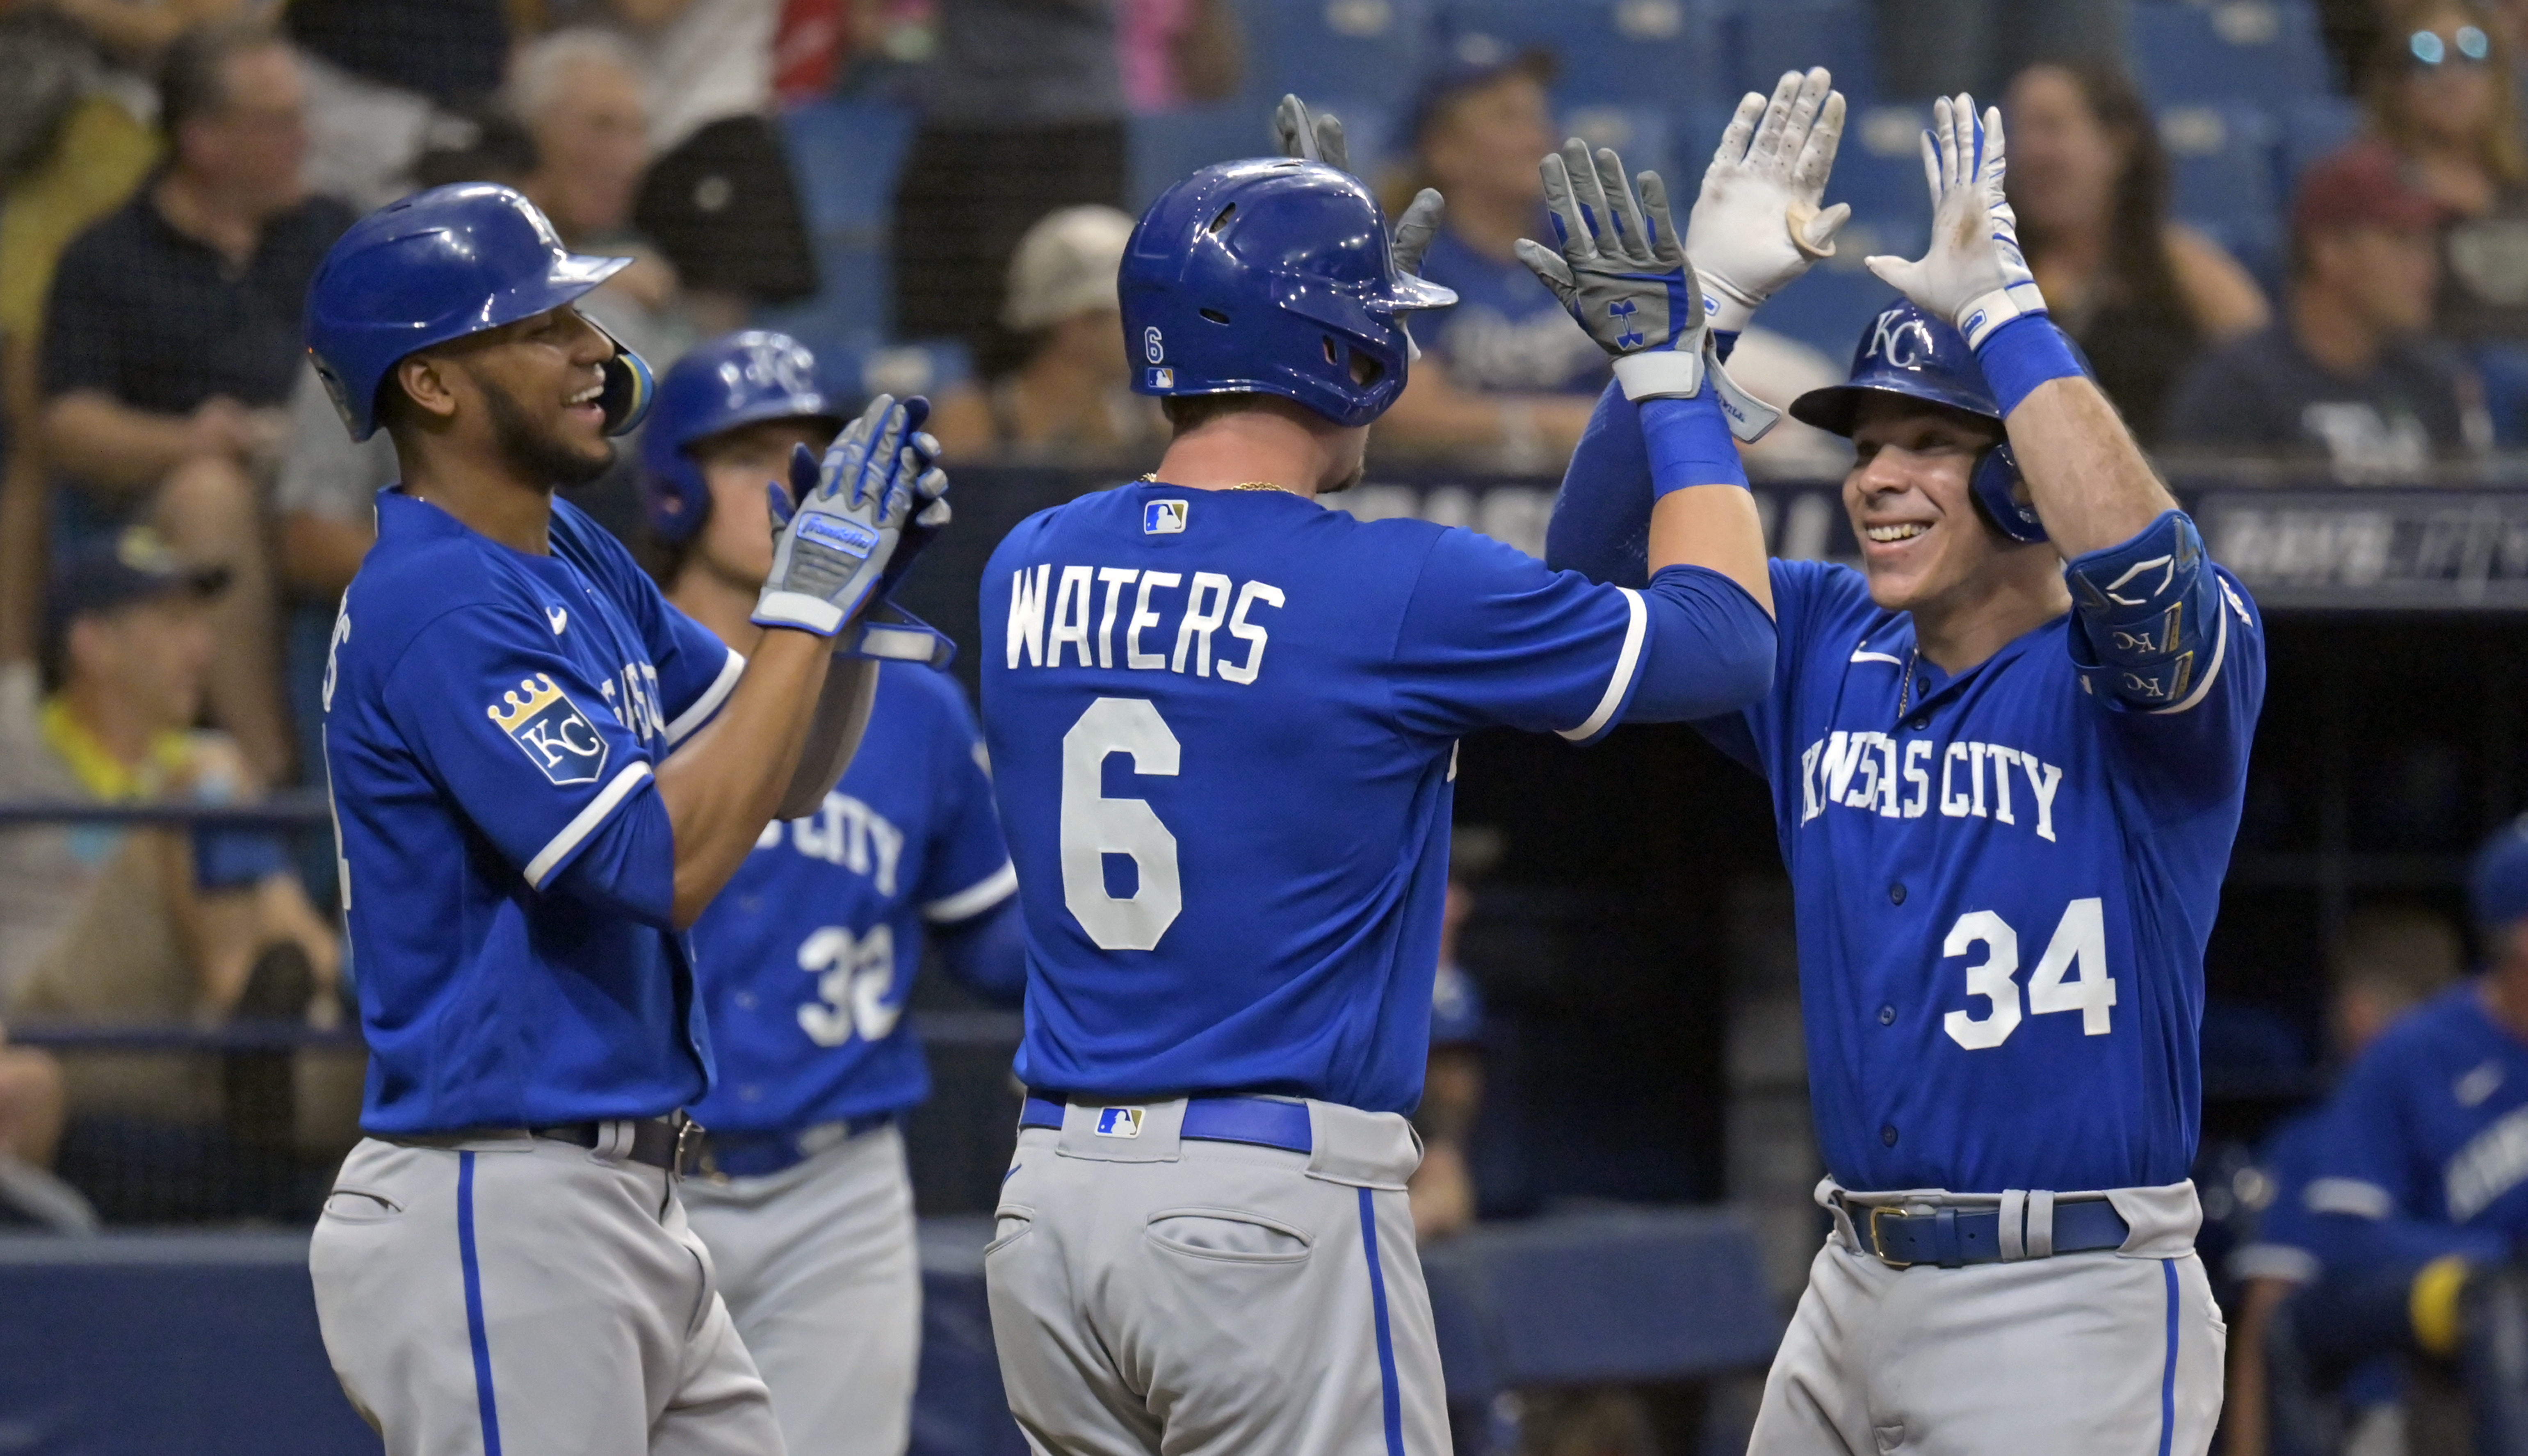 Lyles ends 11-game losing streak, lowly Royals beat the majors-leading Rays